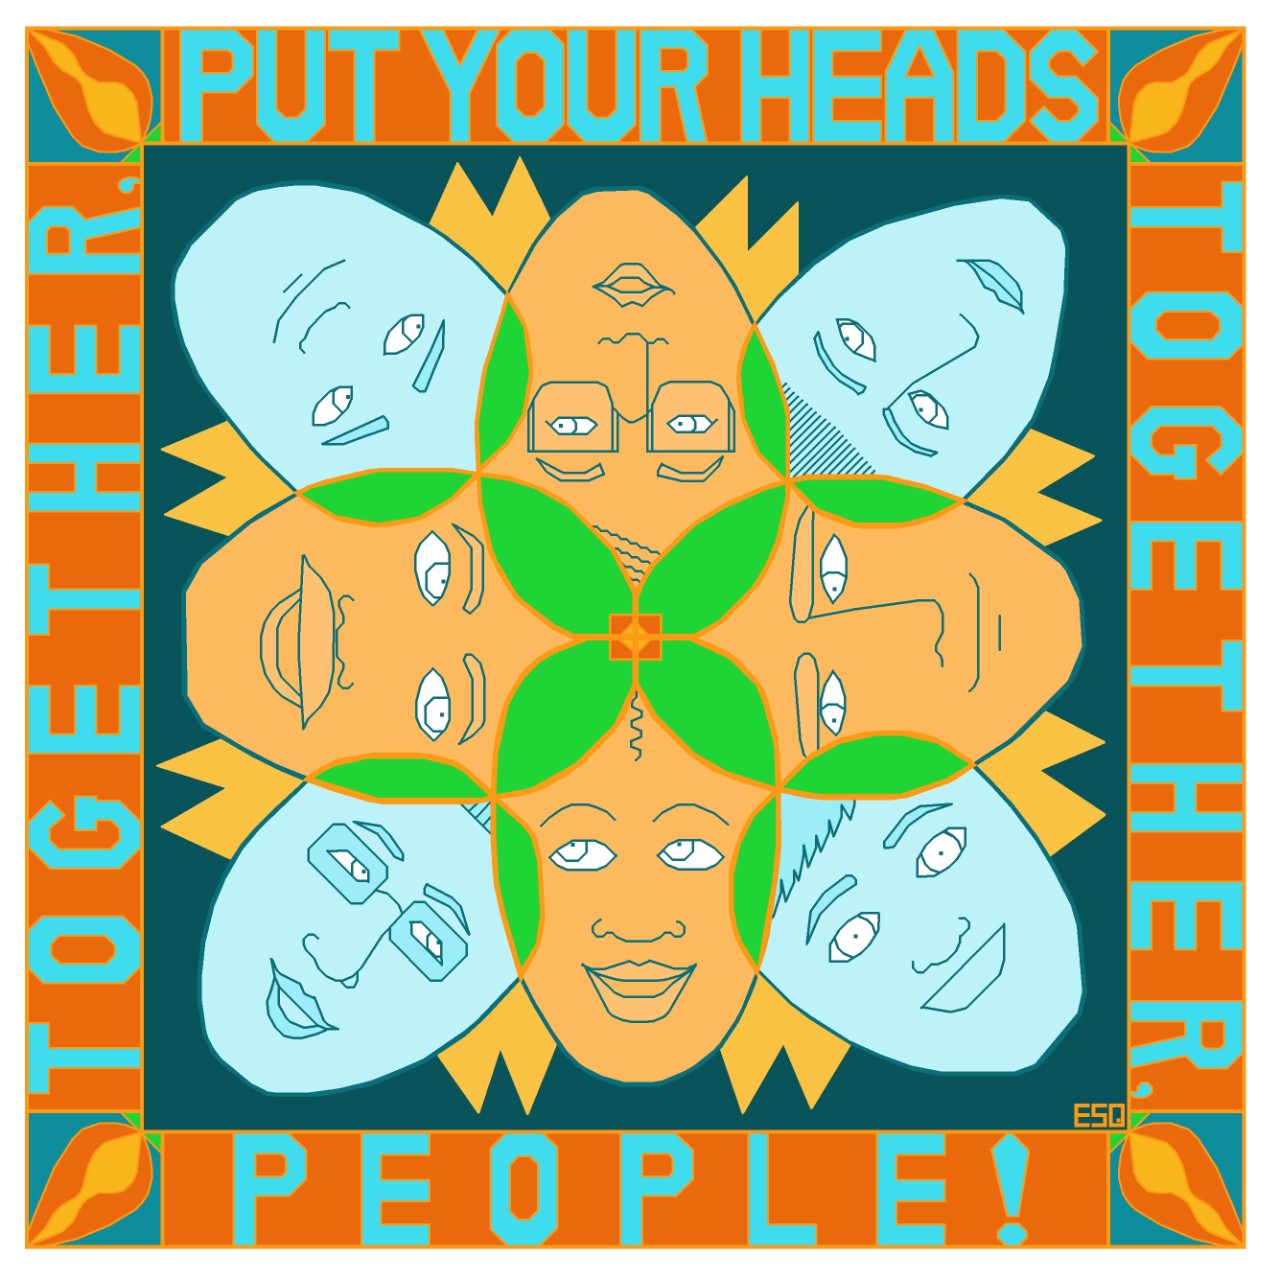 piece is a digital “painting” called, “Put Your Heads Together People” by Erin Brady Worsham, which was created using the Microsoft Paint Program. It features eight different faces clustered together in a design. They all look happy, which makes this appear to be a positive statement about collaborating for a positive result. On the border of the pieces are the words of the title. The prominent colors are blue, green and orange.